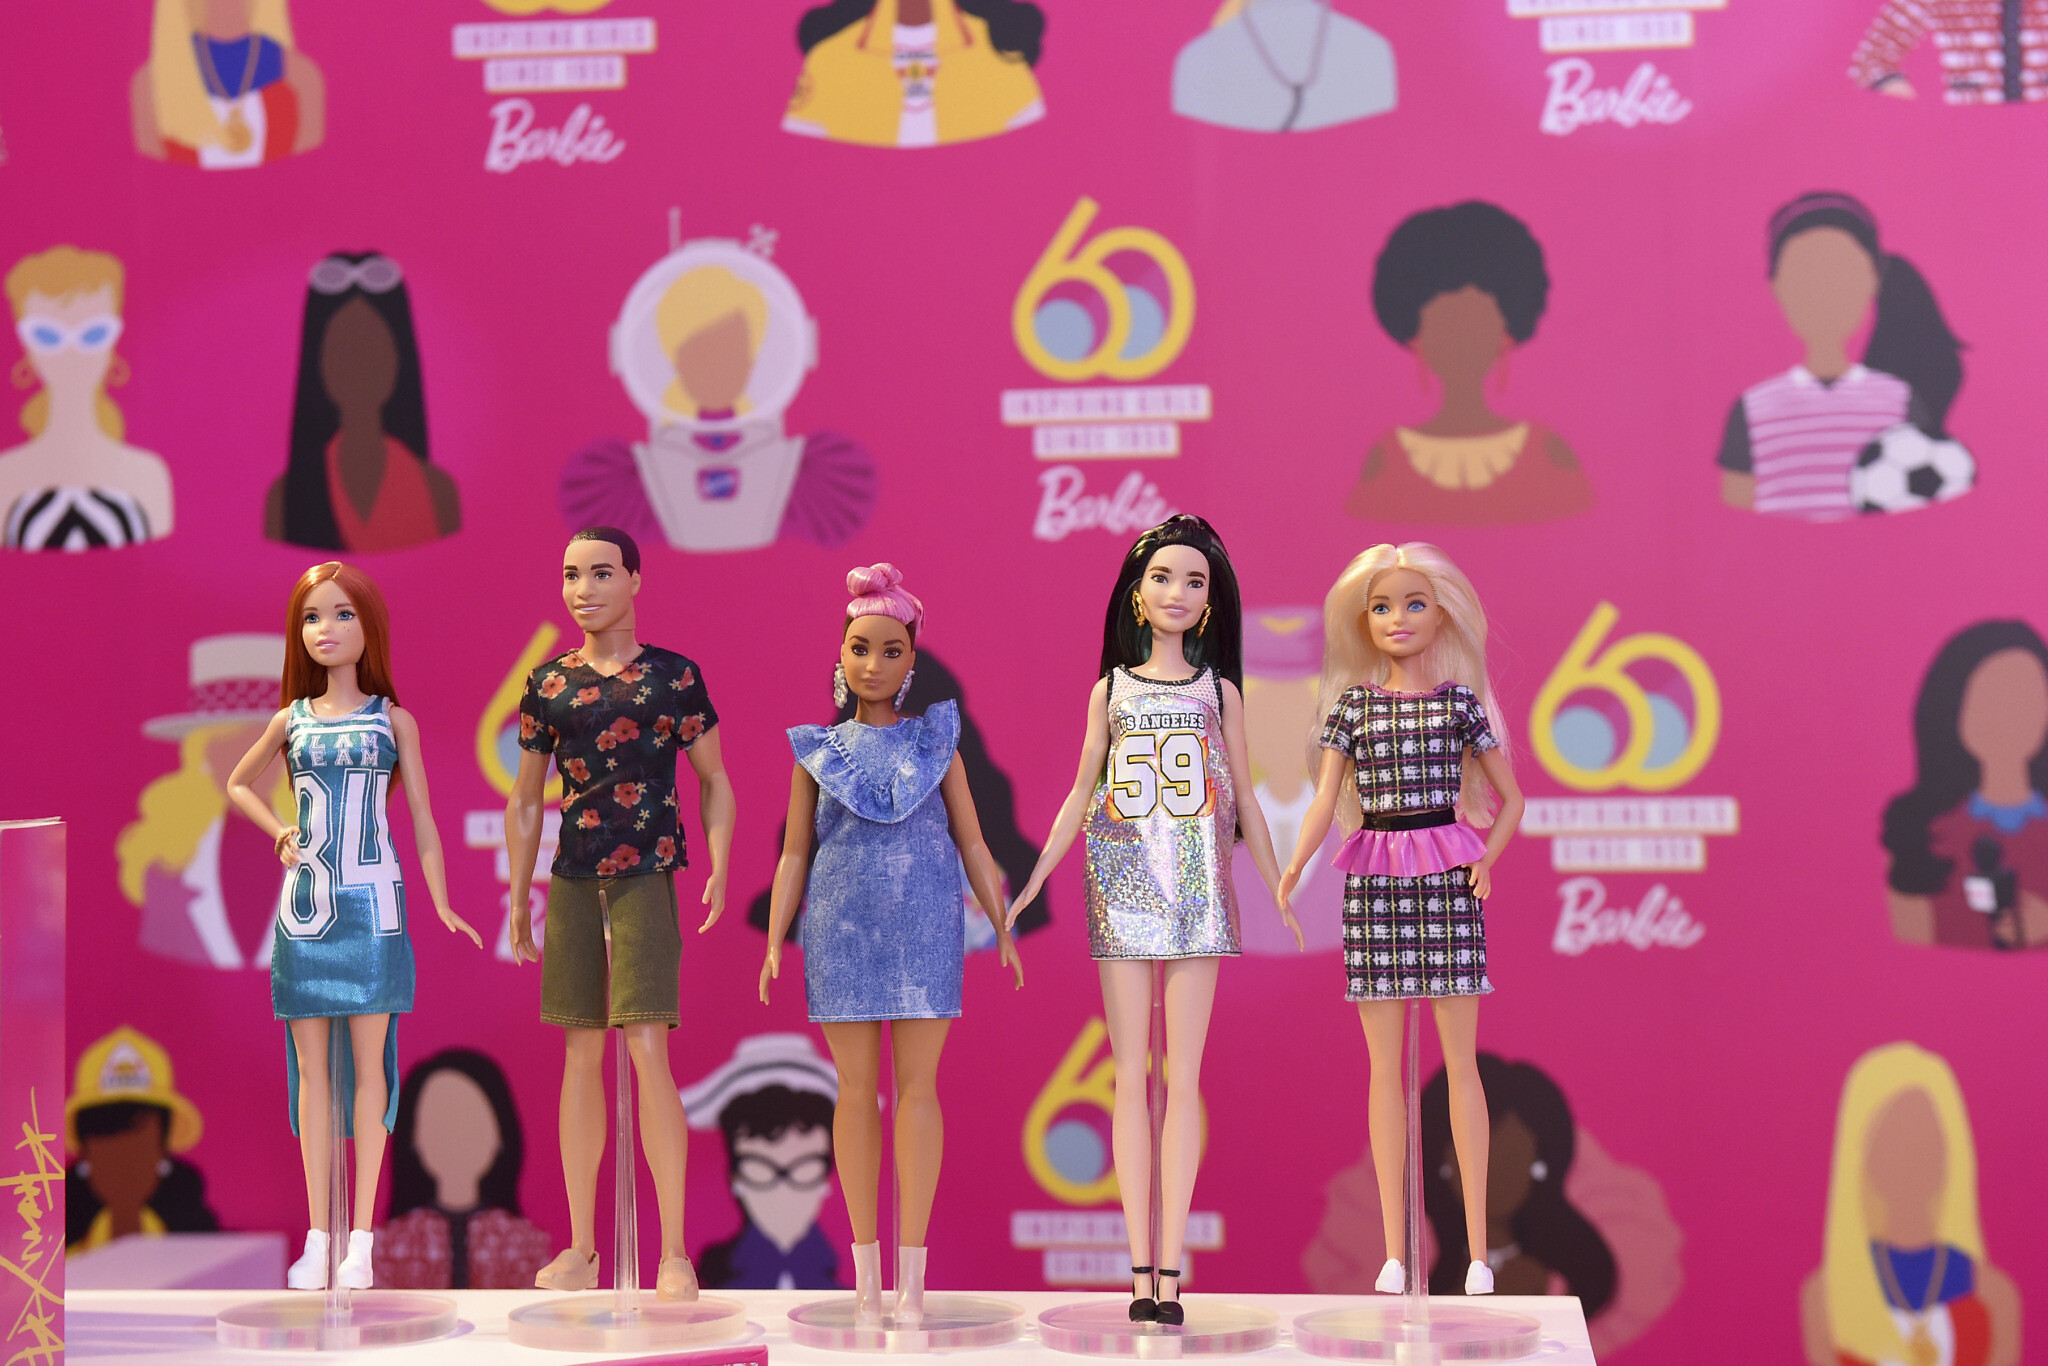 Way before icon Barbie got the Hollywood treatment, she was 'born' with